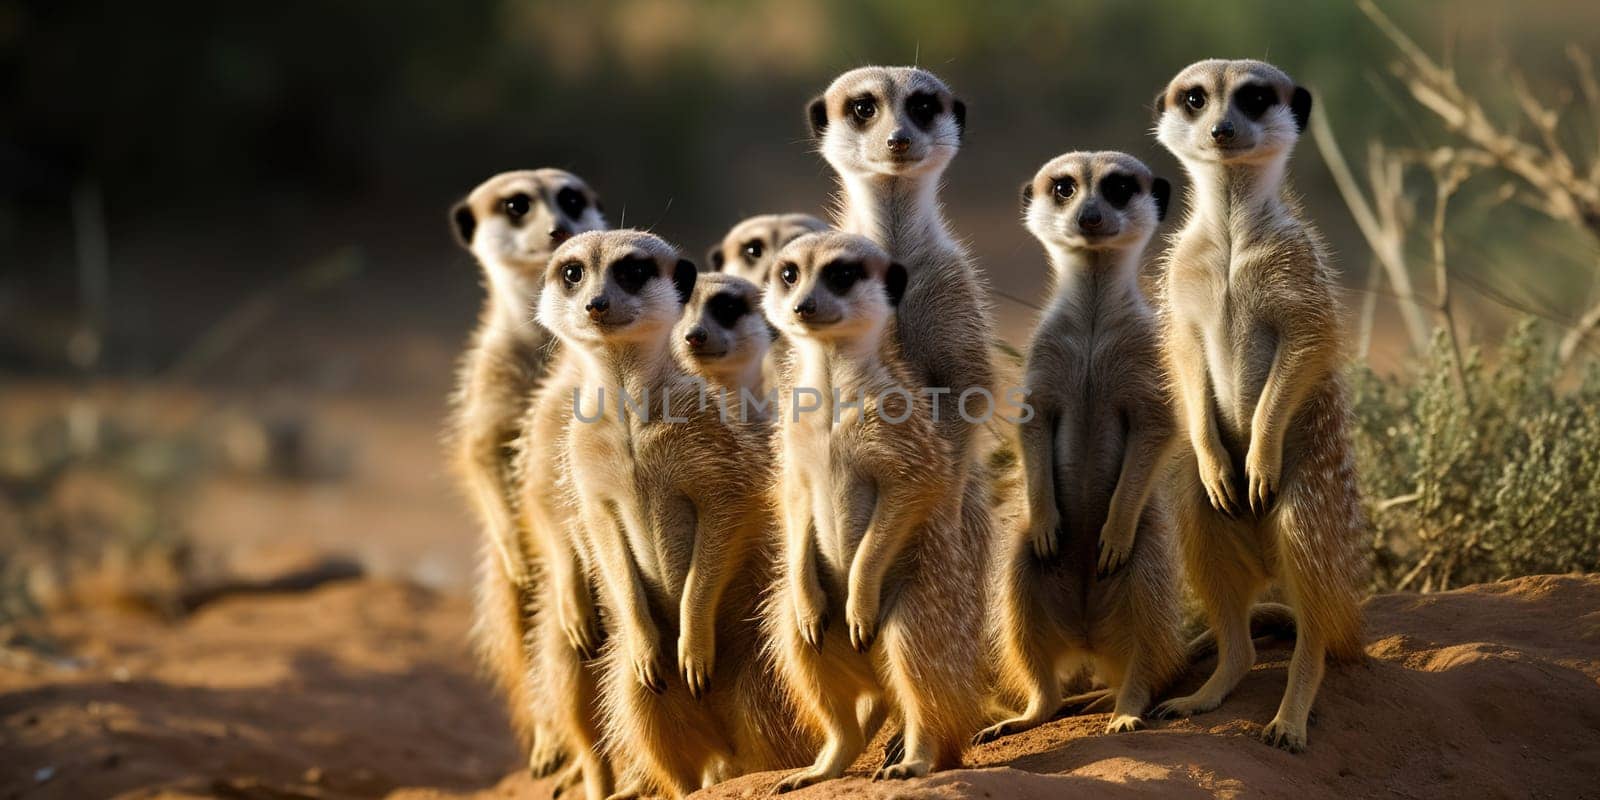 Group of meerkats looking at distance in the steppe by tan4ikk1